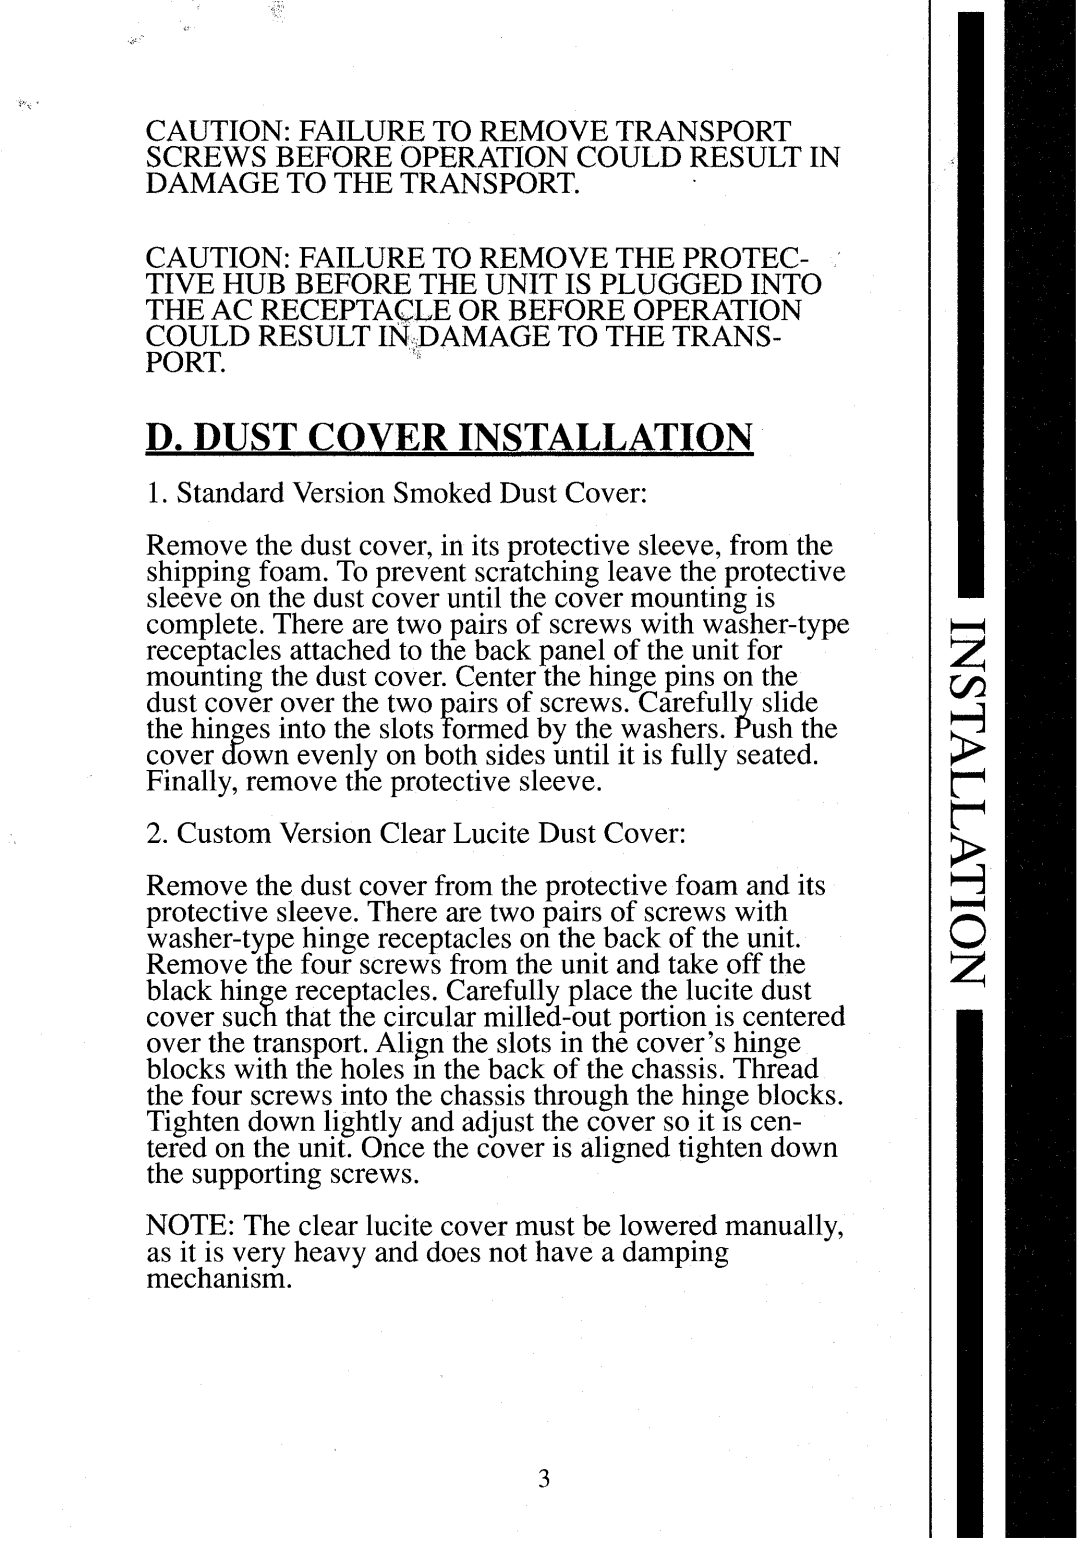 Krell Industries MD2 manual D. Dust Cover Installation 